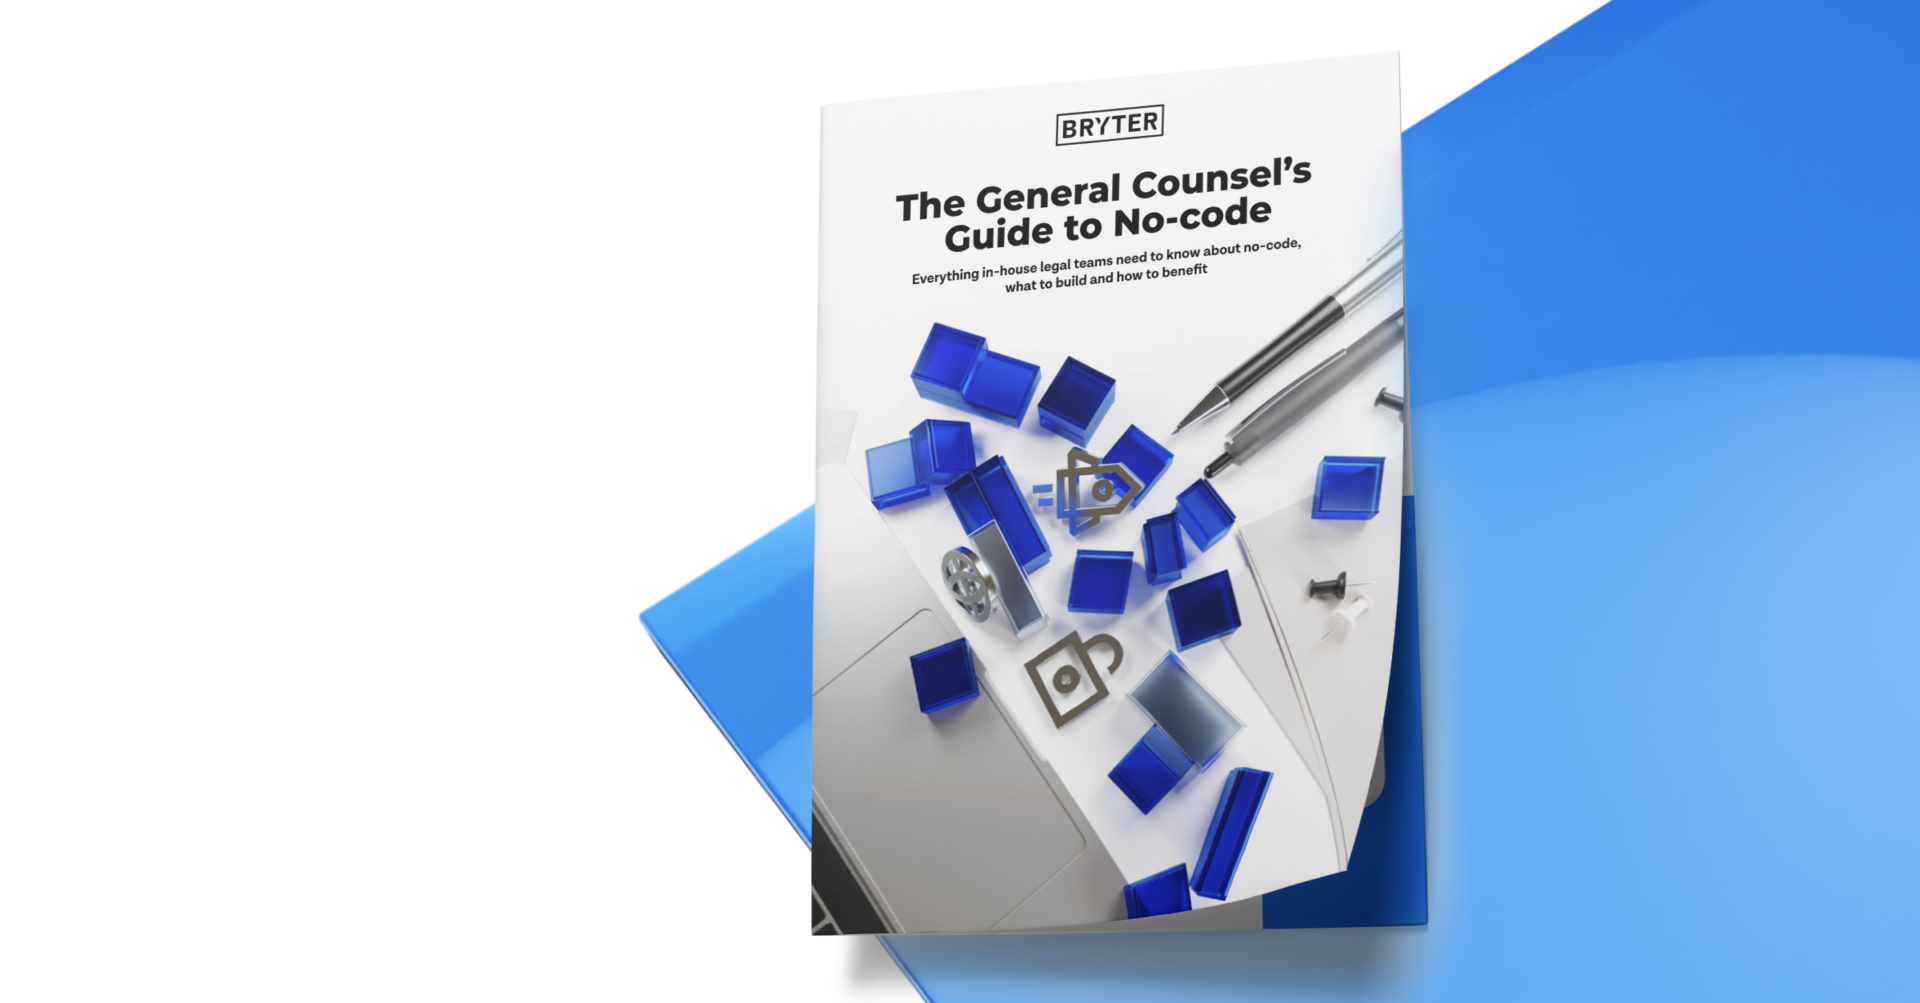 The General Counsel's Guide To No-Code